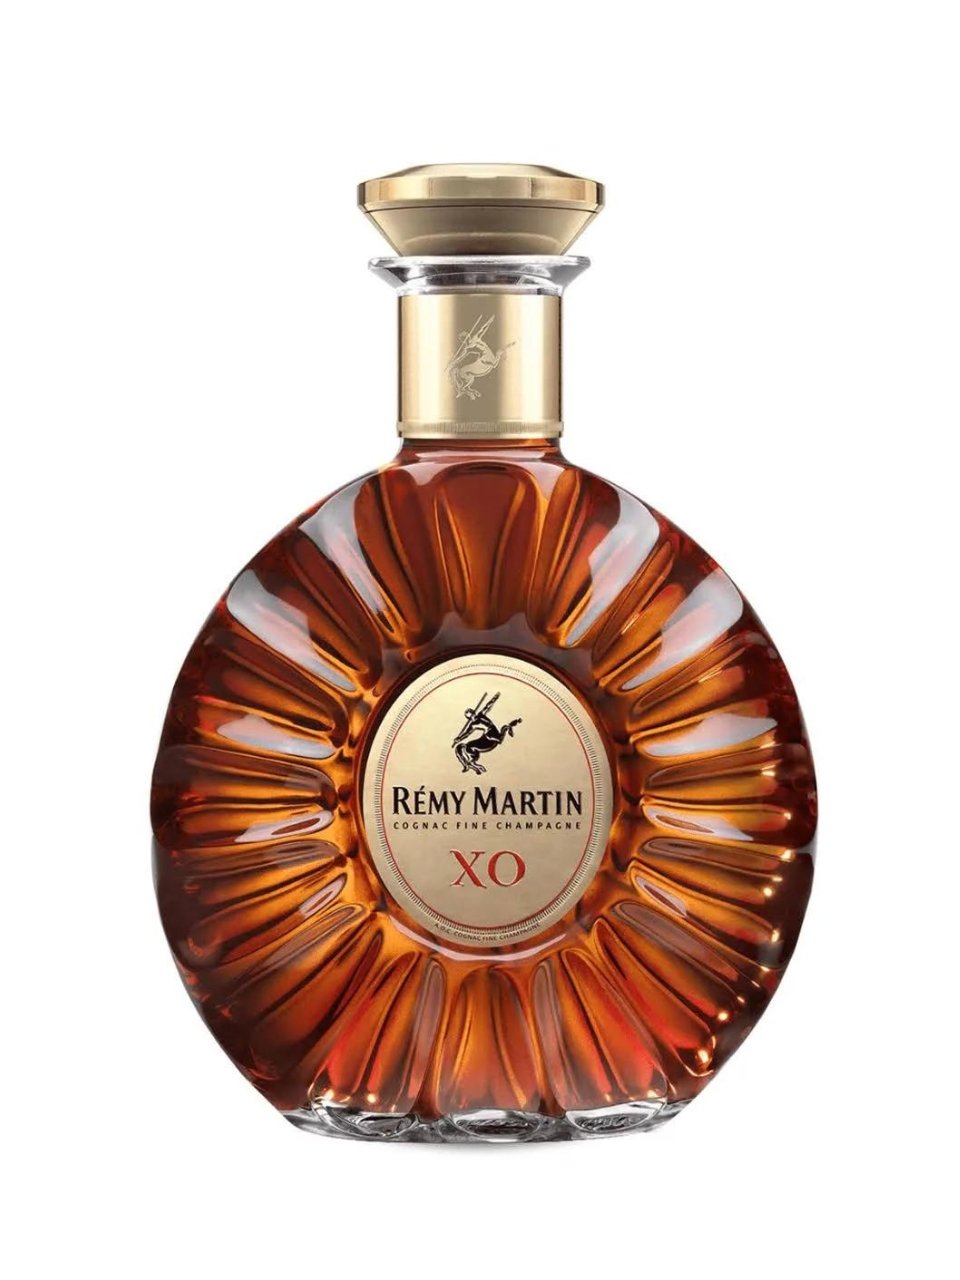 Remy Martin XO Excellence Cognac | Exquisite Wine & Alcohol Gift Delivery Toronto Canada | Vyno